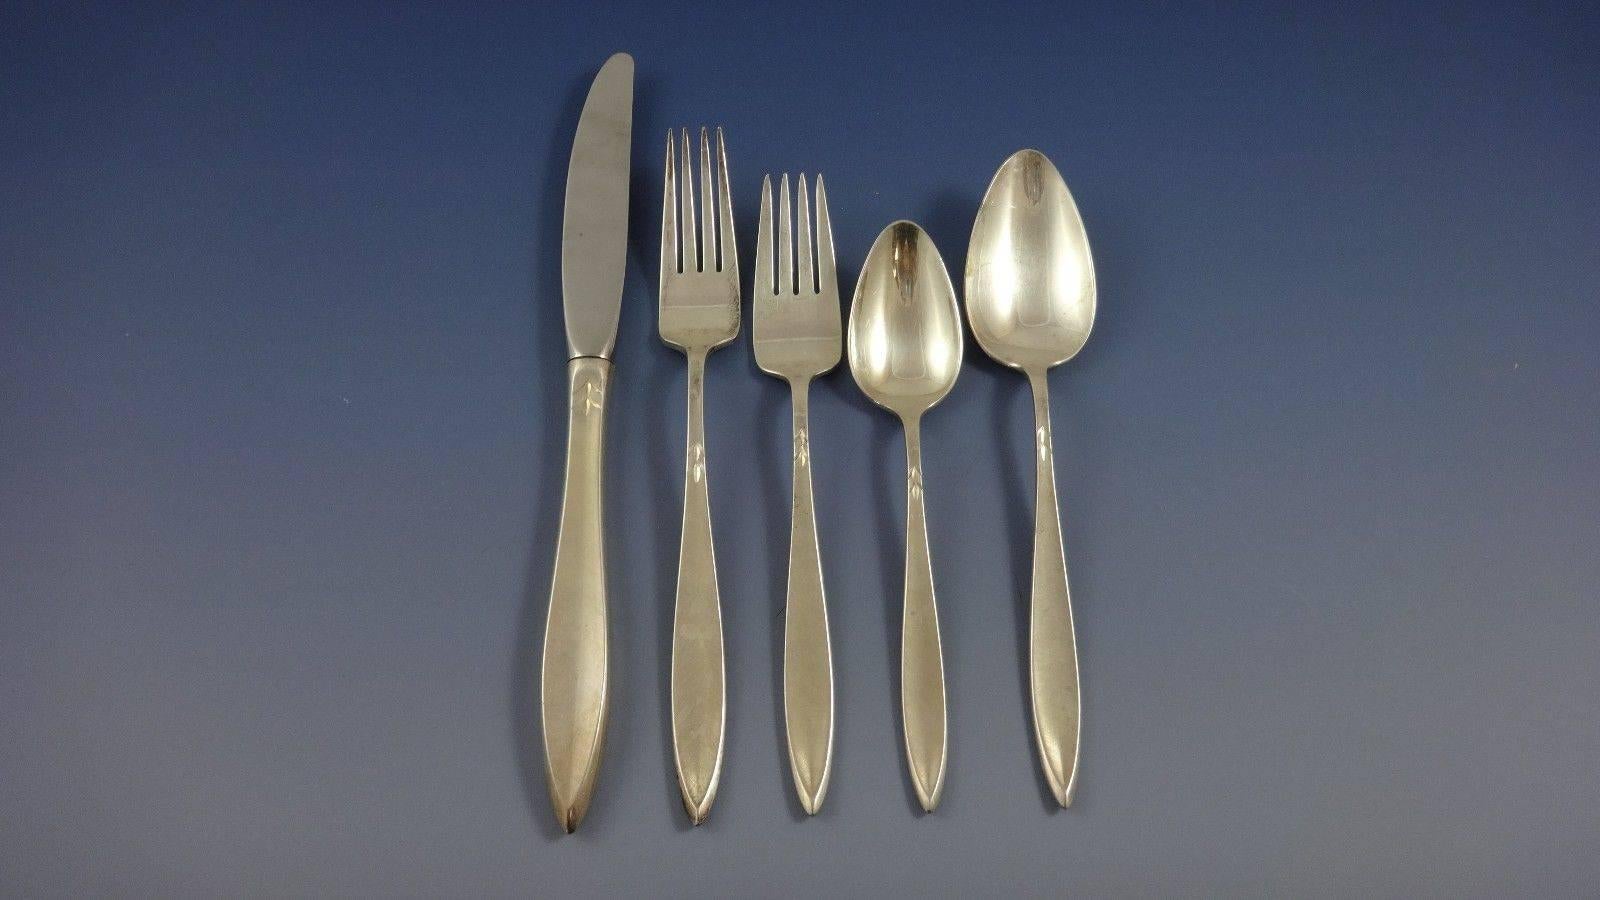 Gossamer by Gorham Sterling Silver Flatware Set for 12 Service of 69 Pieces, this set includes: 12 knives 8 7/8", 12 forks 7 3/8", 12 salad forks 6 5/8", 12 teaspoons 6", 12 place soup spoons 7", one gravy ladle 7 1/4",